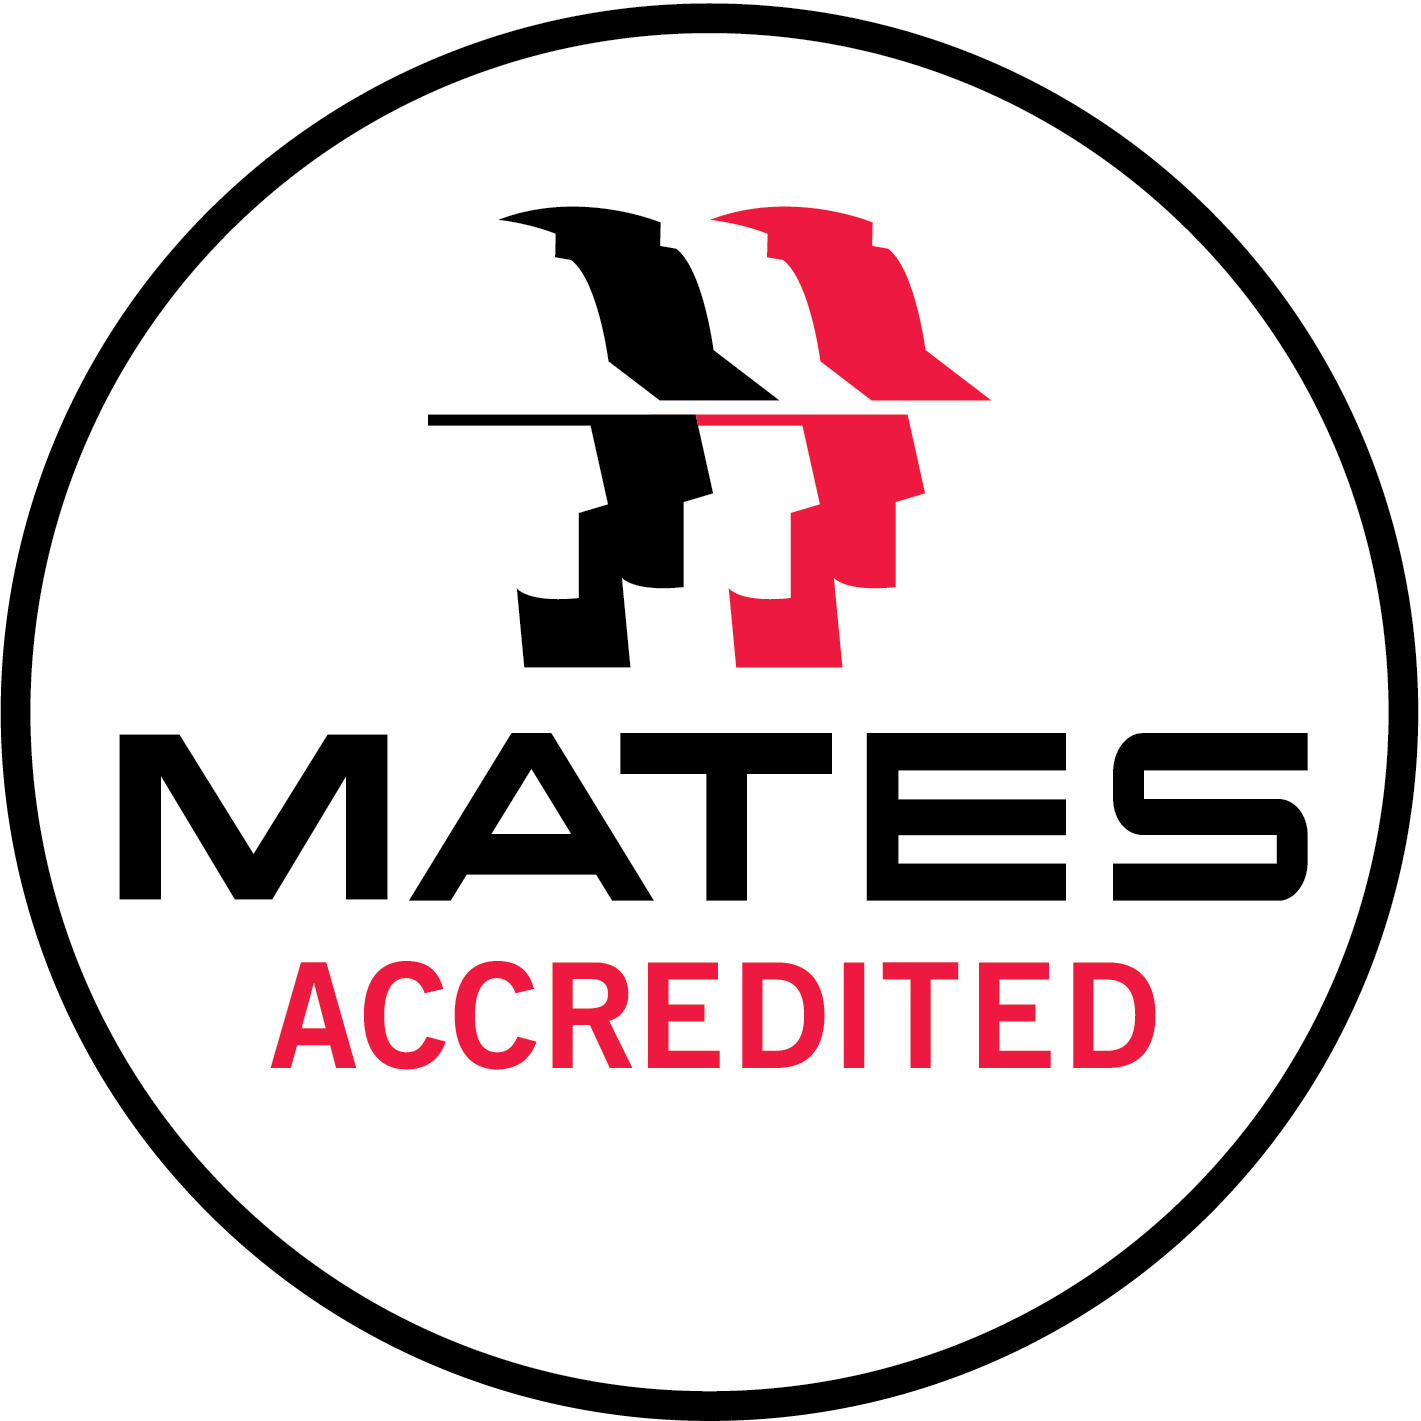 MATES-ACCREDITED-CMYK-Colour (002).png